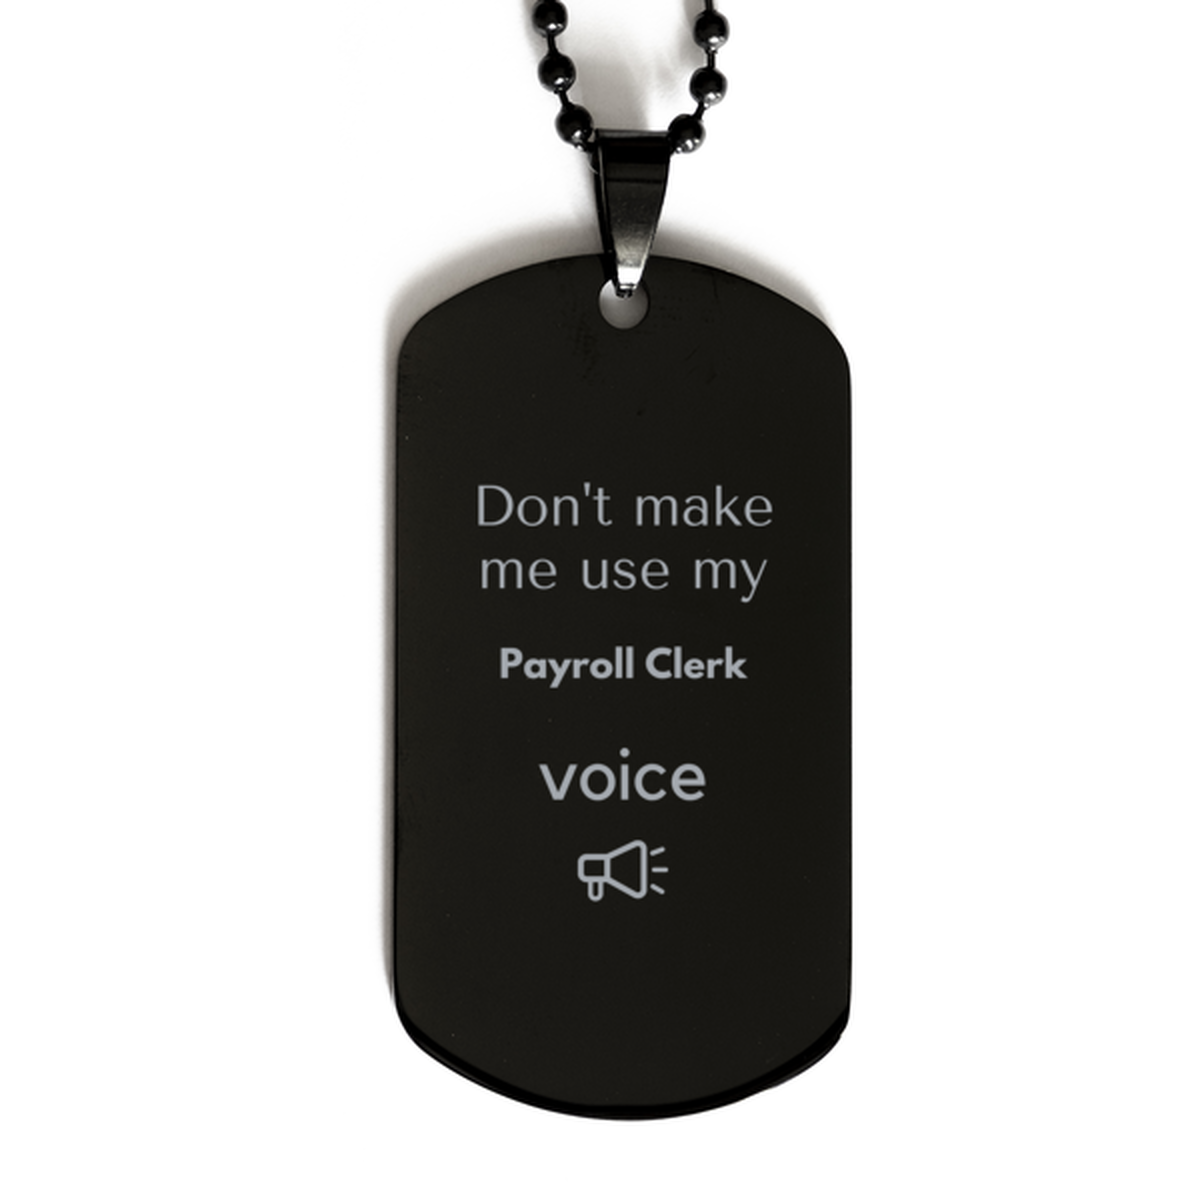 Don't make me use my Payroll Clerk voice, Sarcasm Payroll Clerk Gifts, Christmas Payroll Clerk Black Dog Tag Birthday Unique Gifts For Payroll Clerk Coworkers, Men, Women, Colleague, Friends